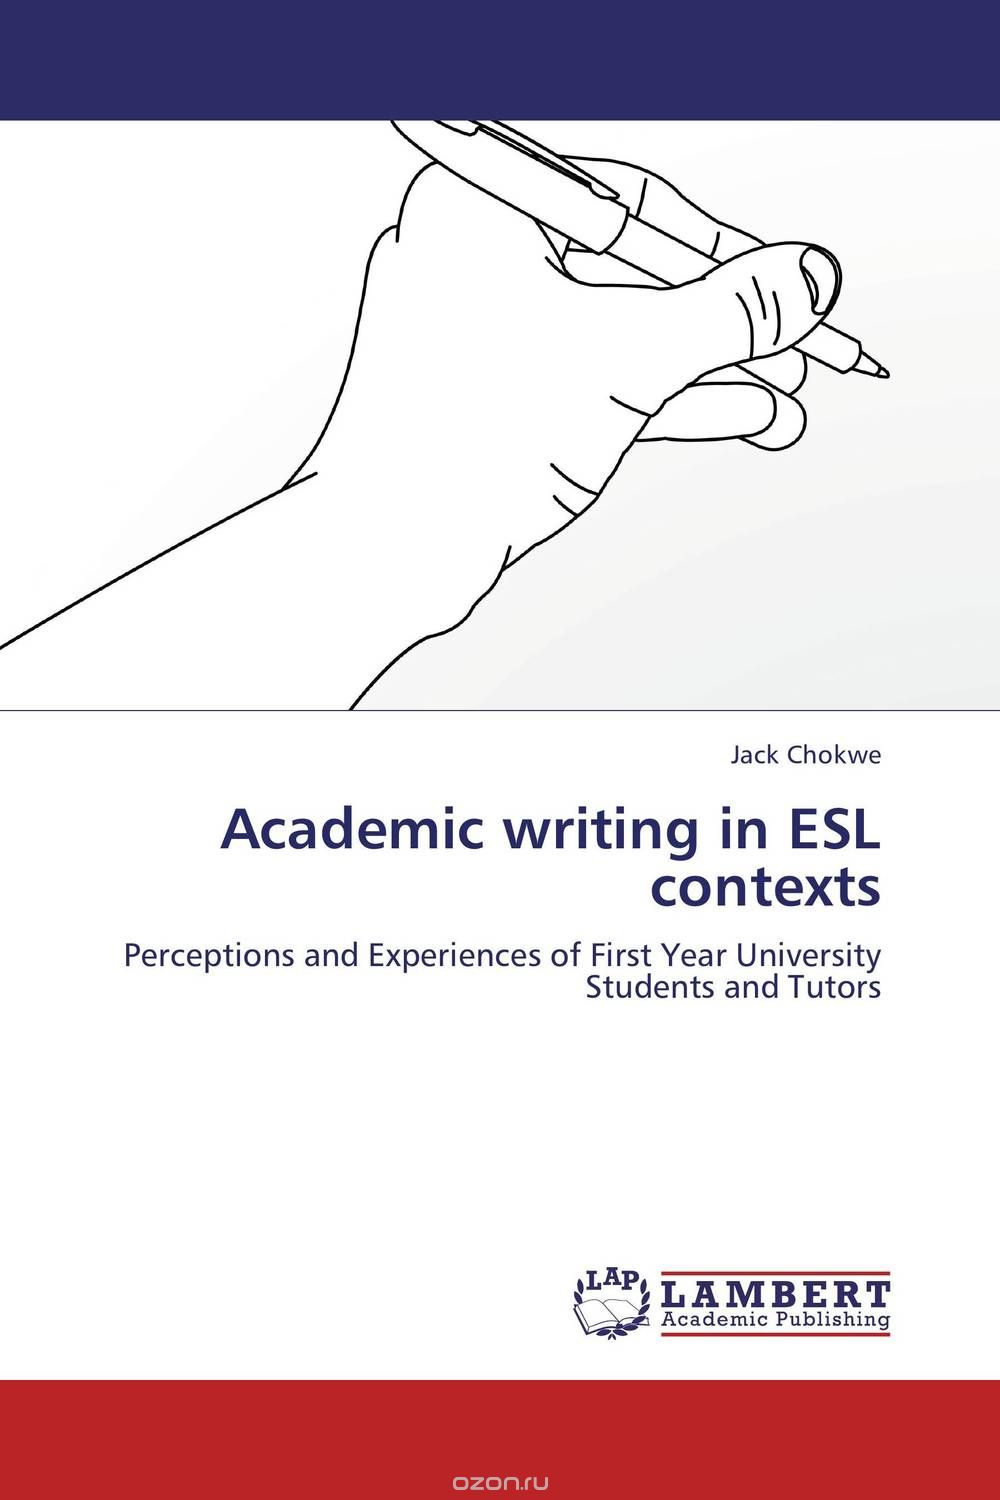 Academic writing in ESL contexts